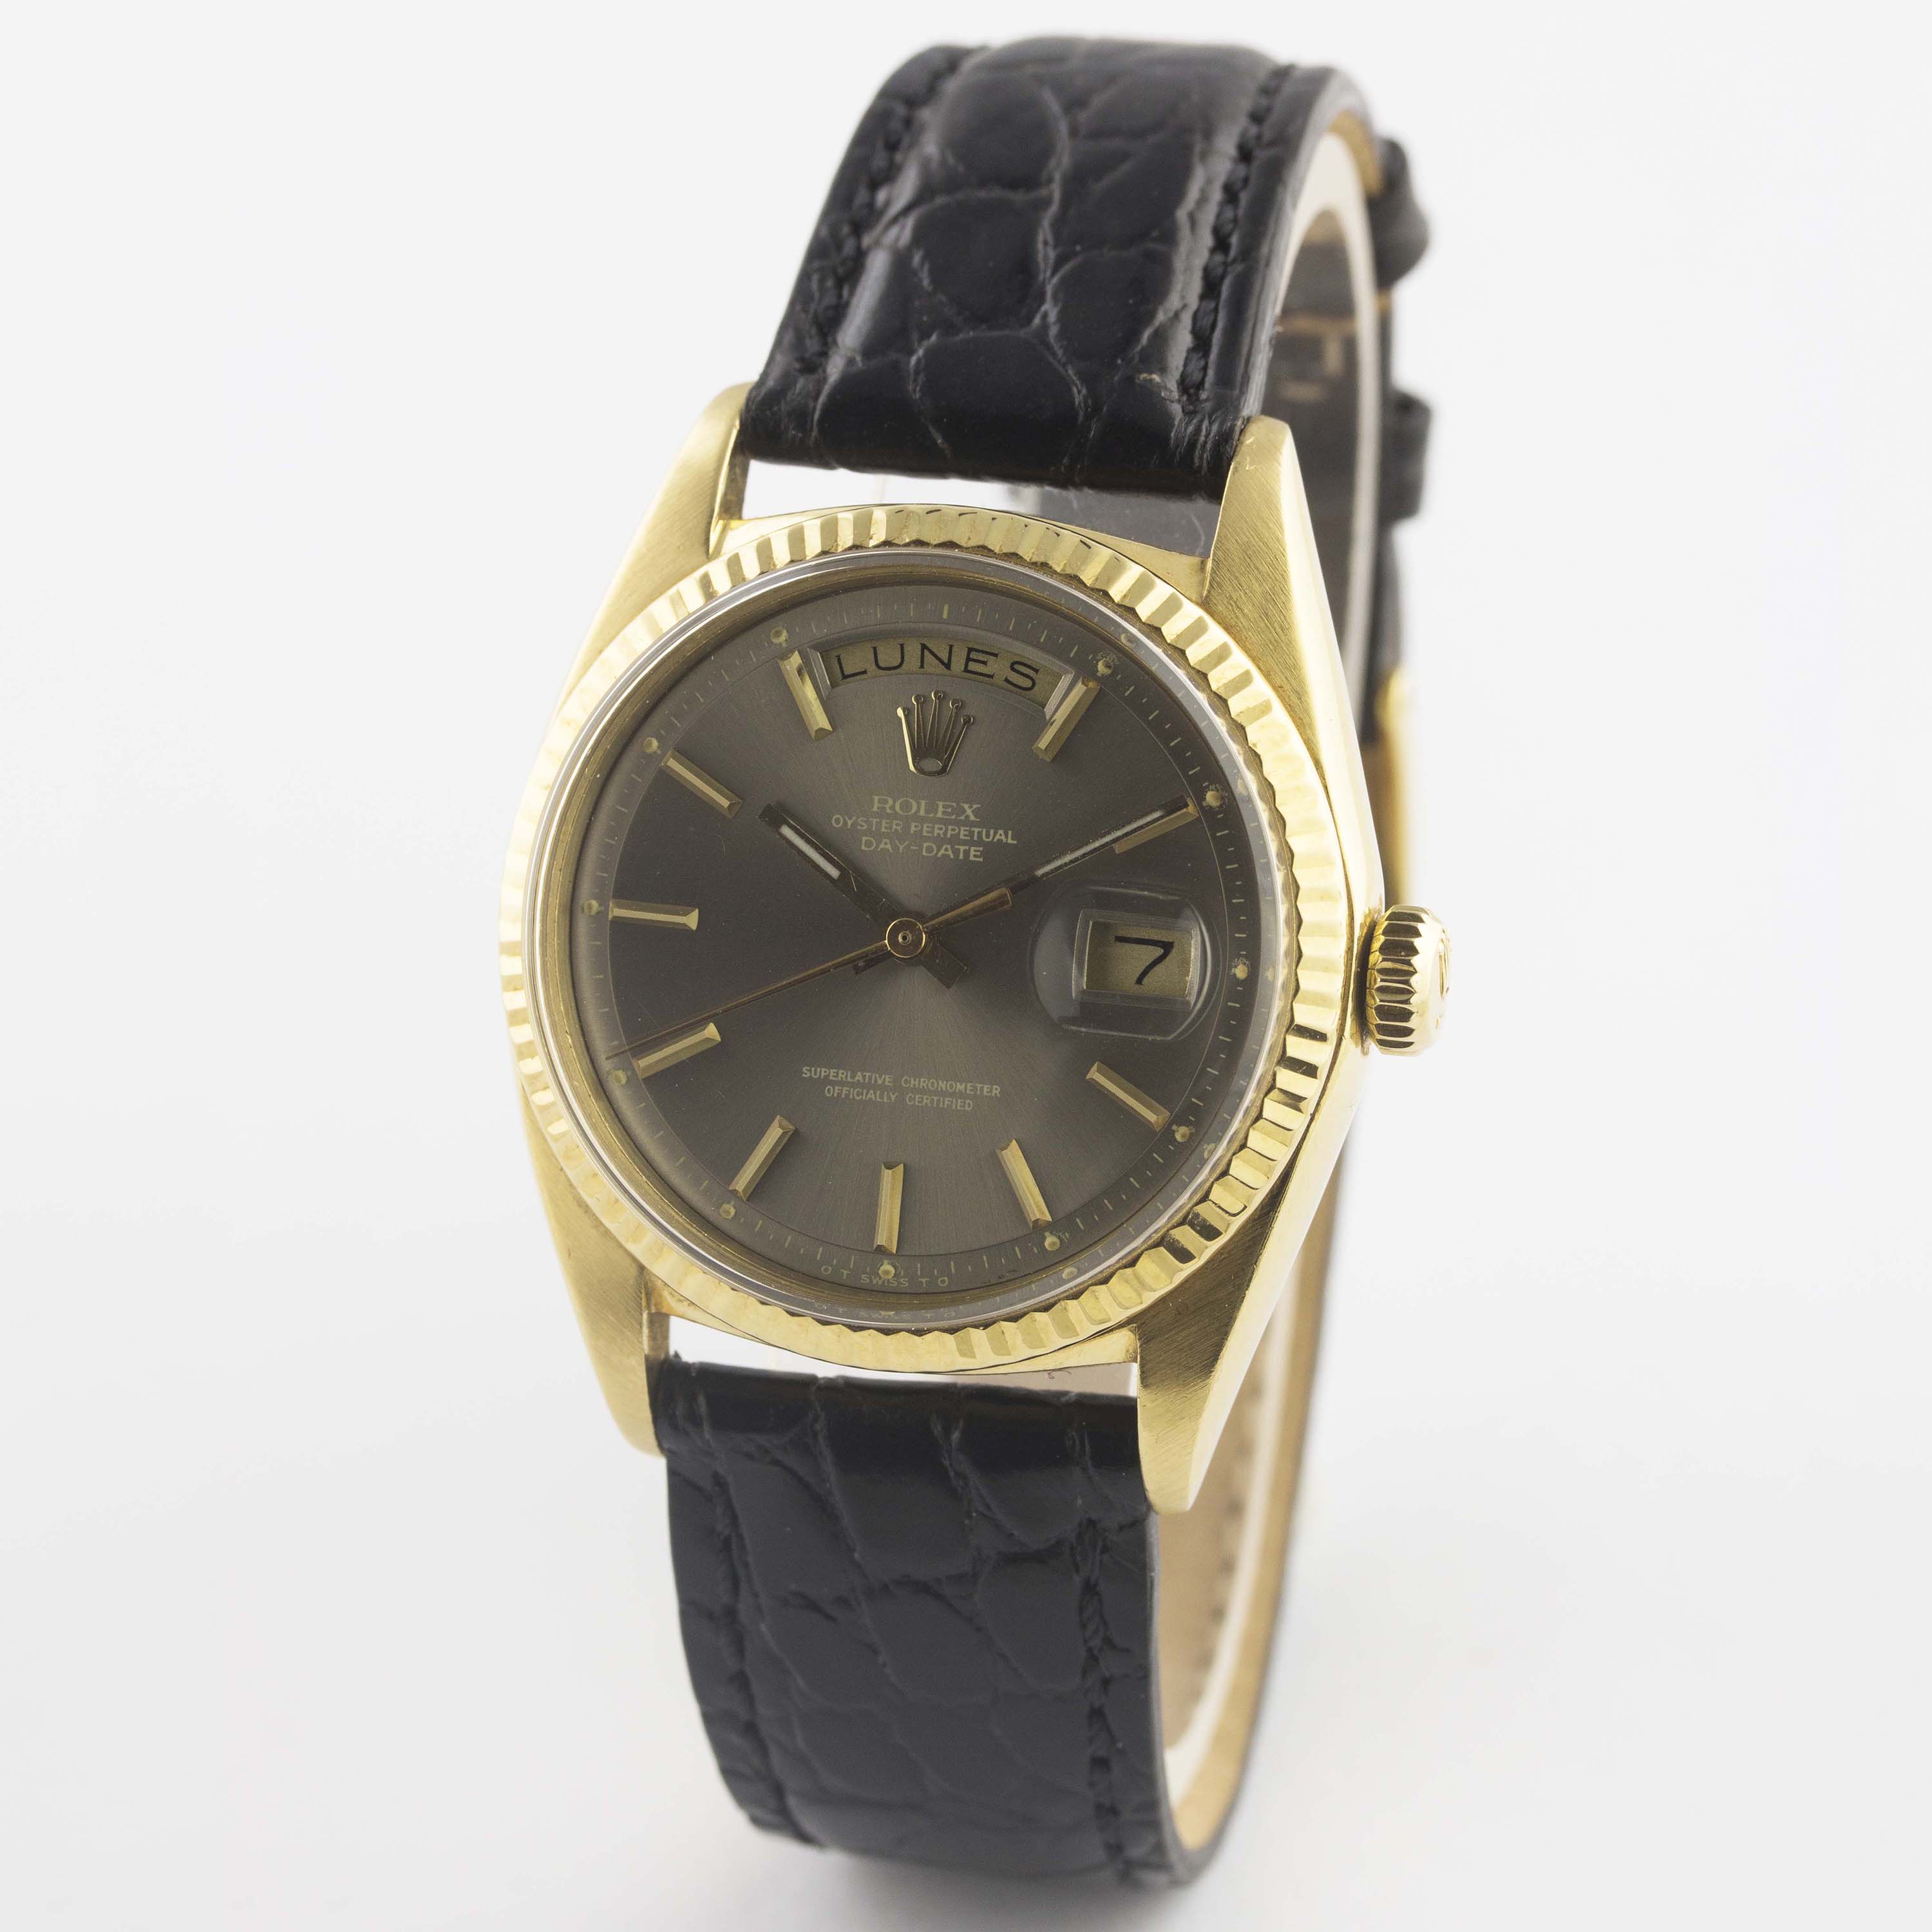 A RARE GENTLEMAN'S 18K SOLID GOLD ROLEX OYSTER PERPETUAL DAY DATE WRIST WATCH CIRCA 1972, REF. - Image 4 of 11